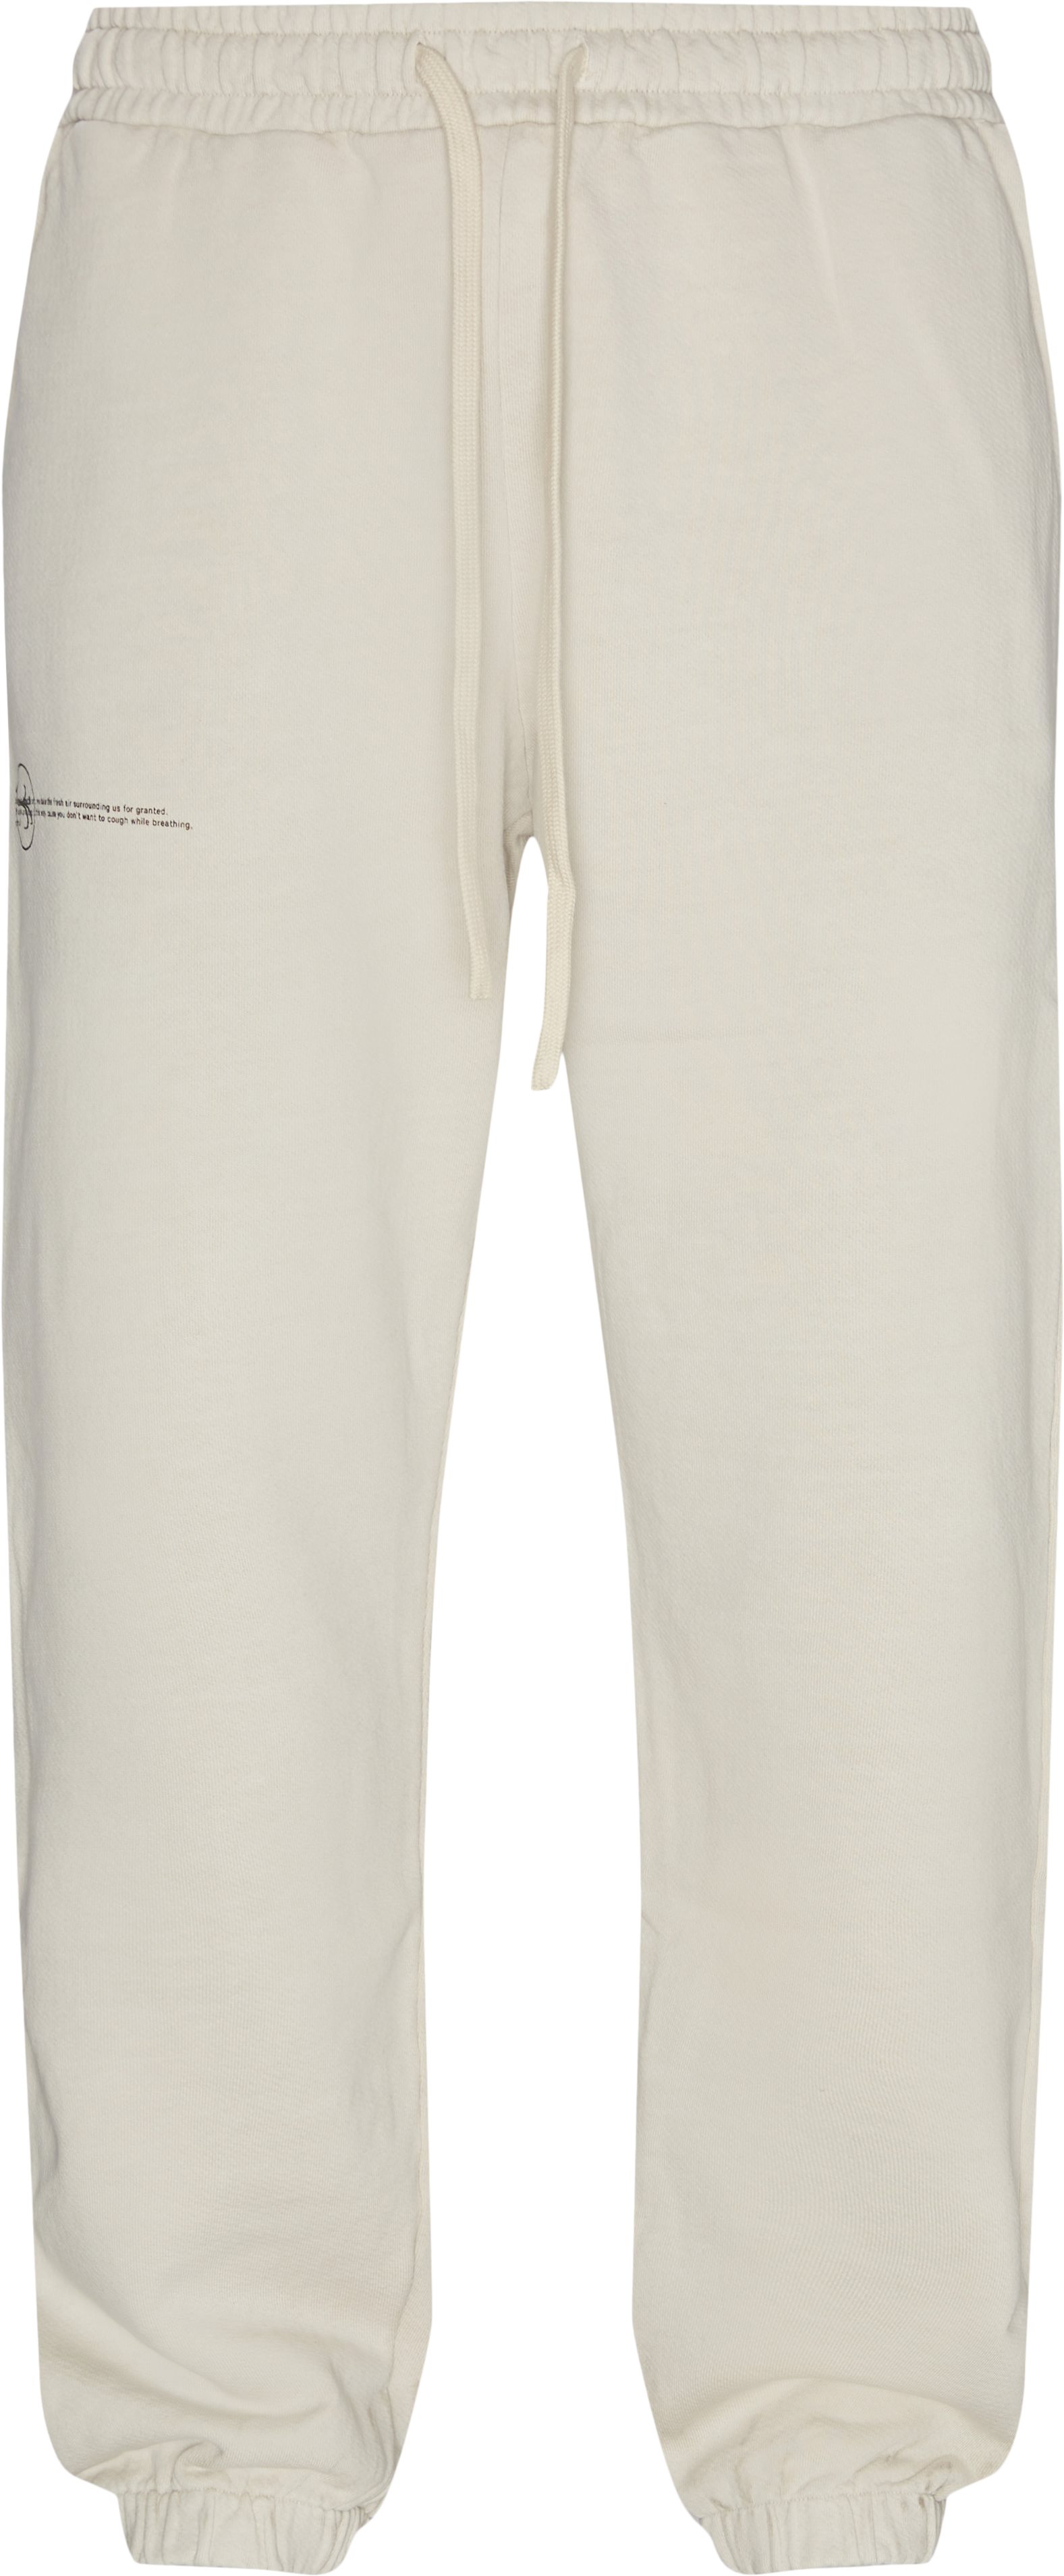 Project Earth sweatpants - Trousers - Regular fit - White